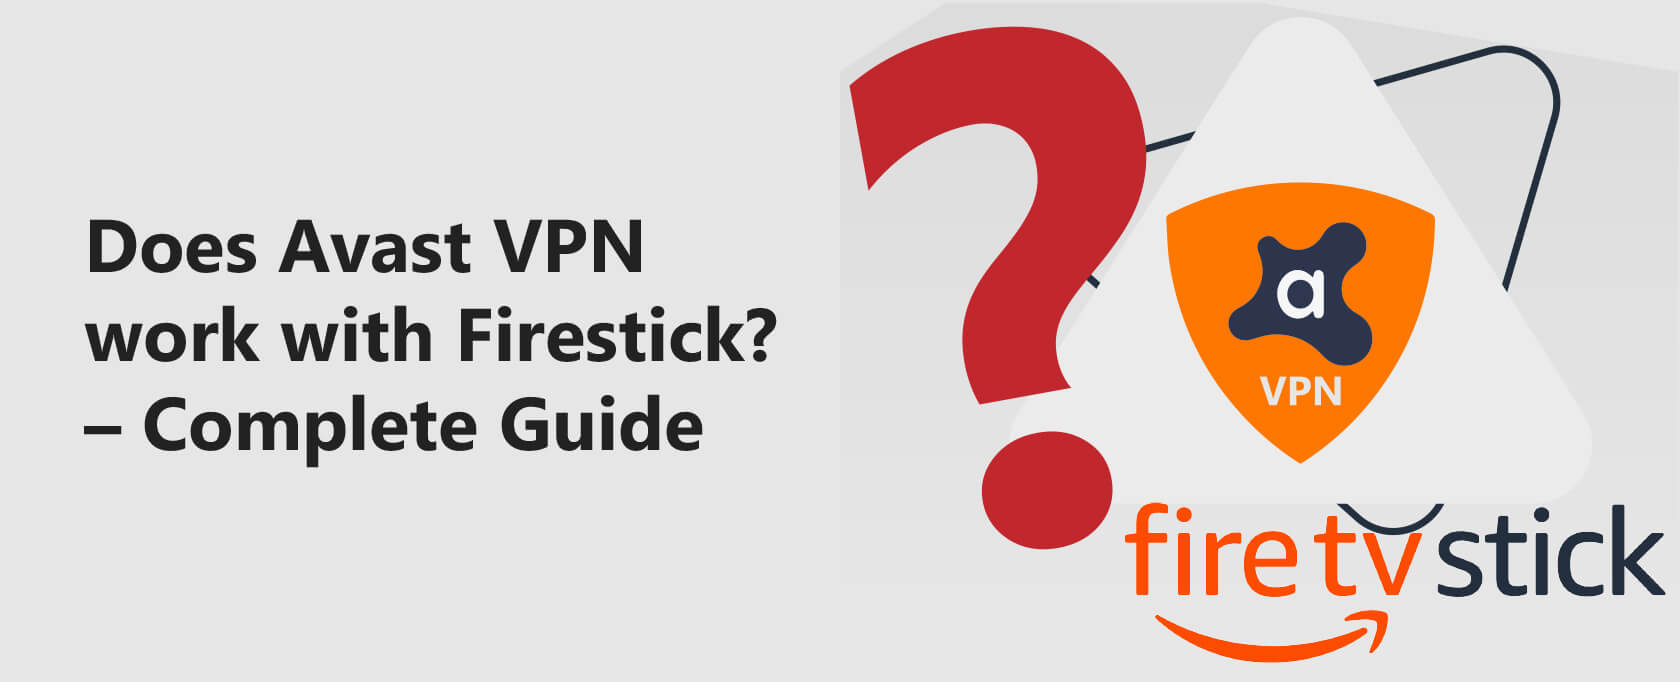 Does Avast VPN Work with Firestick? – Complete Guide